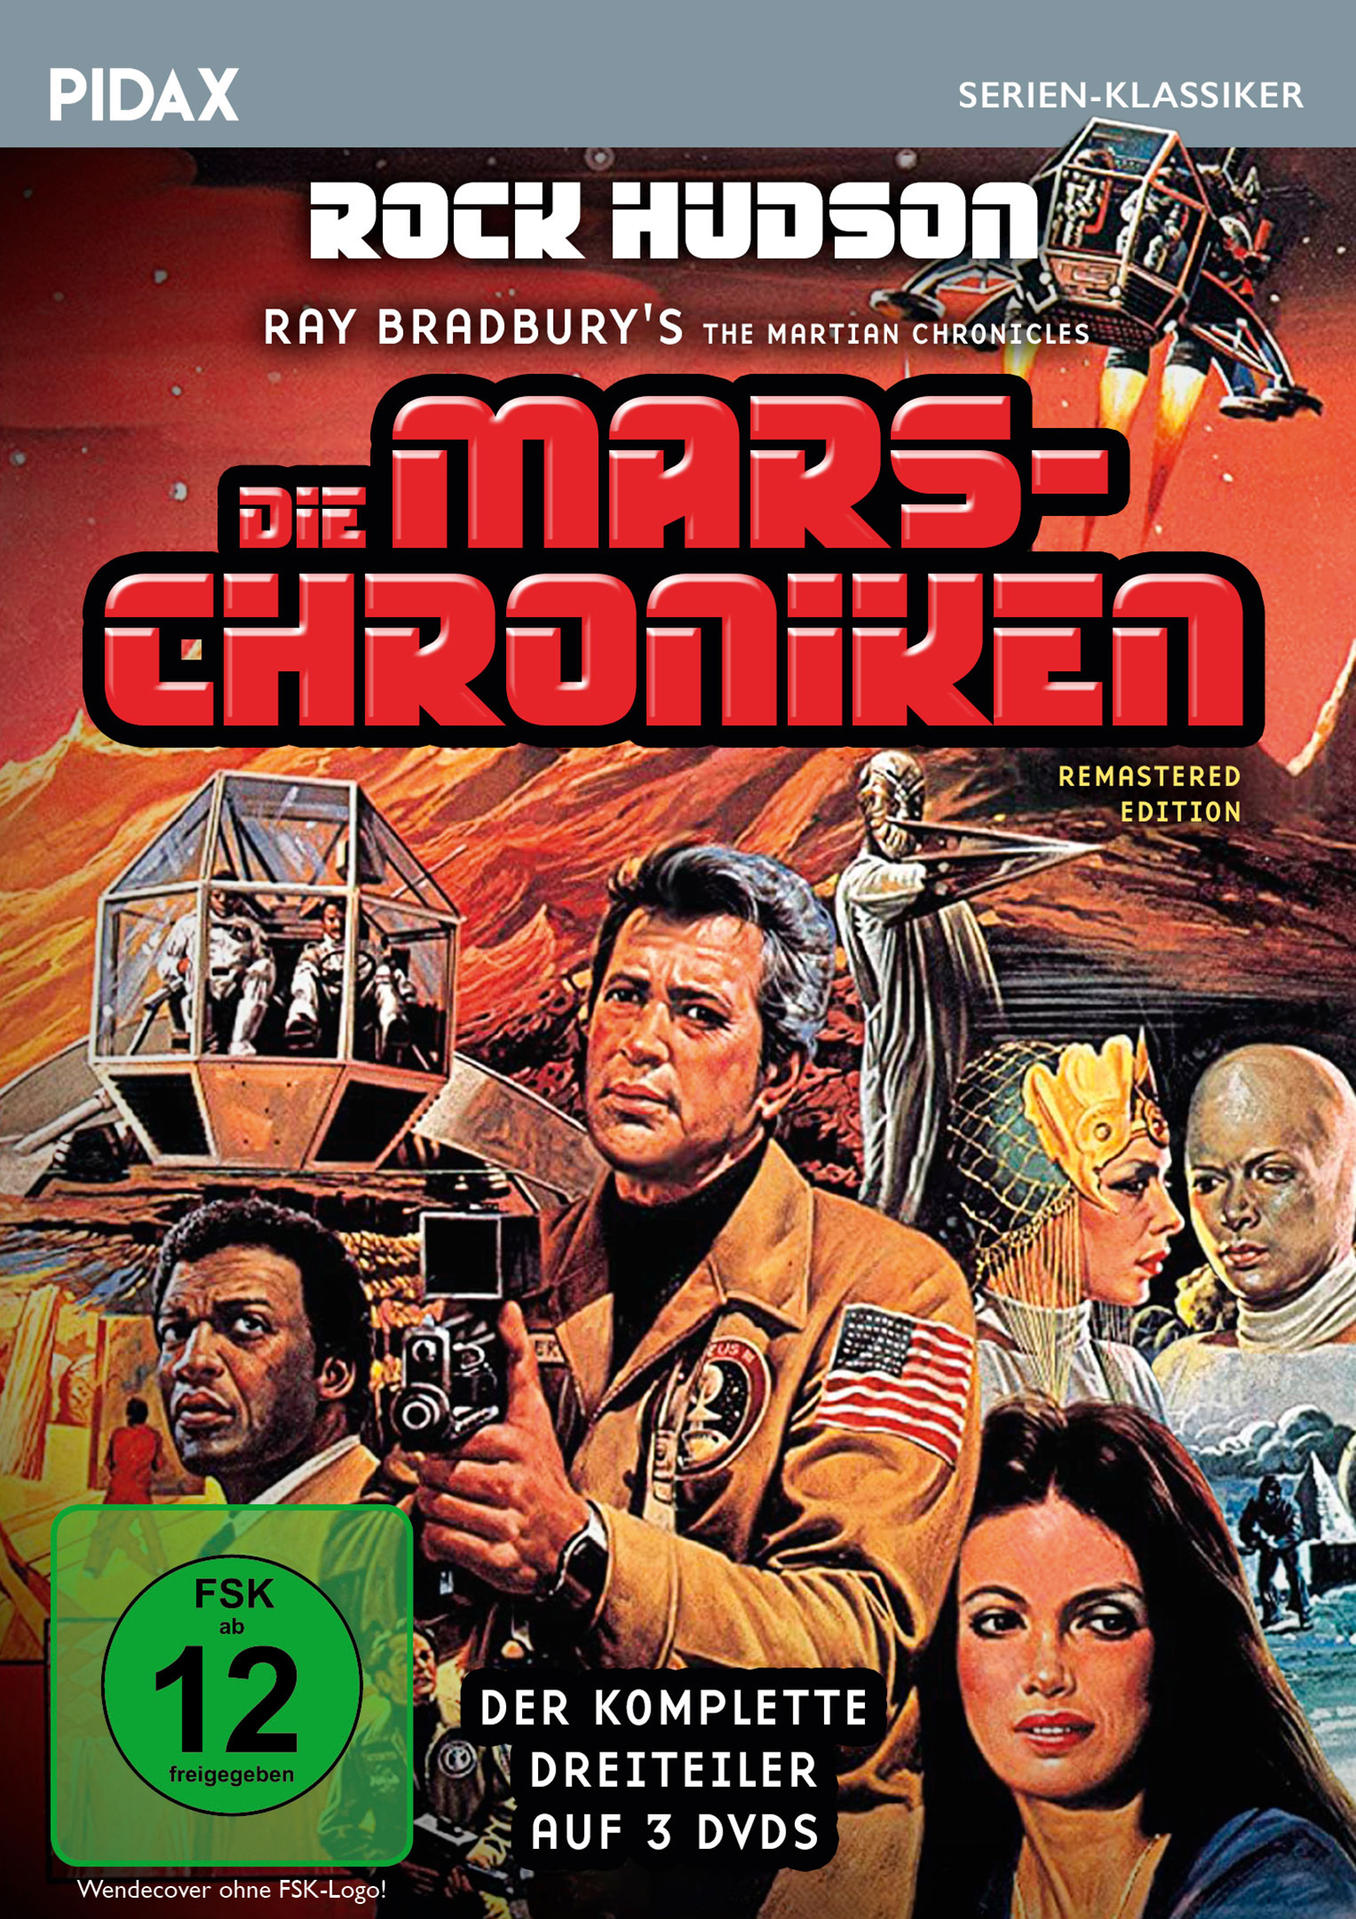 Die Mars-Chroniken (The Martian Chronicles) Edition - DVD Remastered